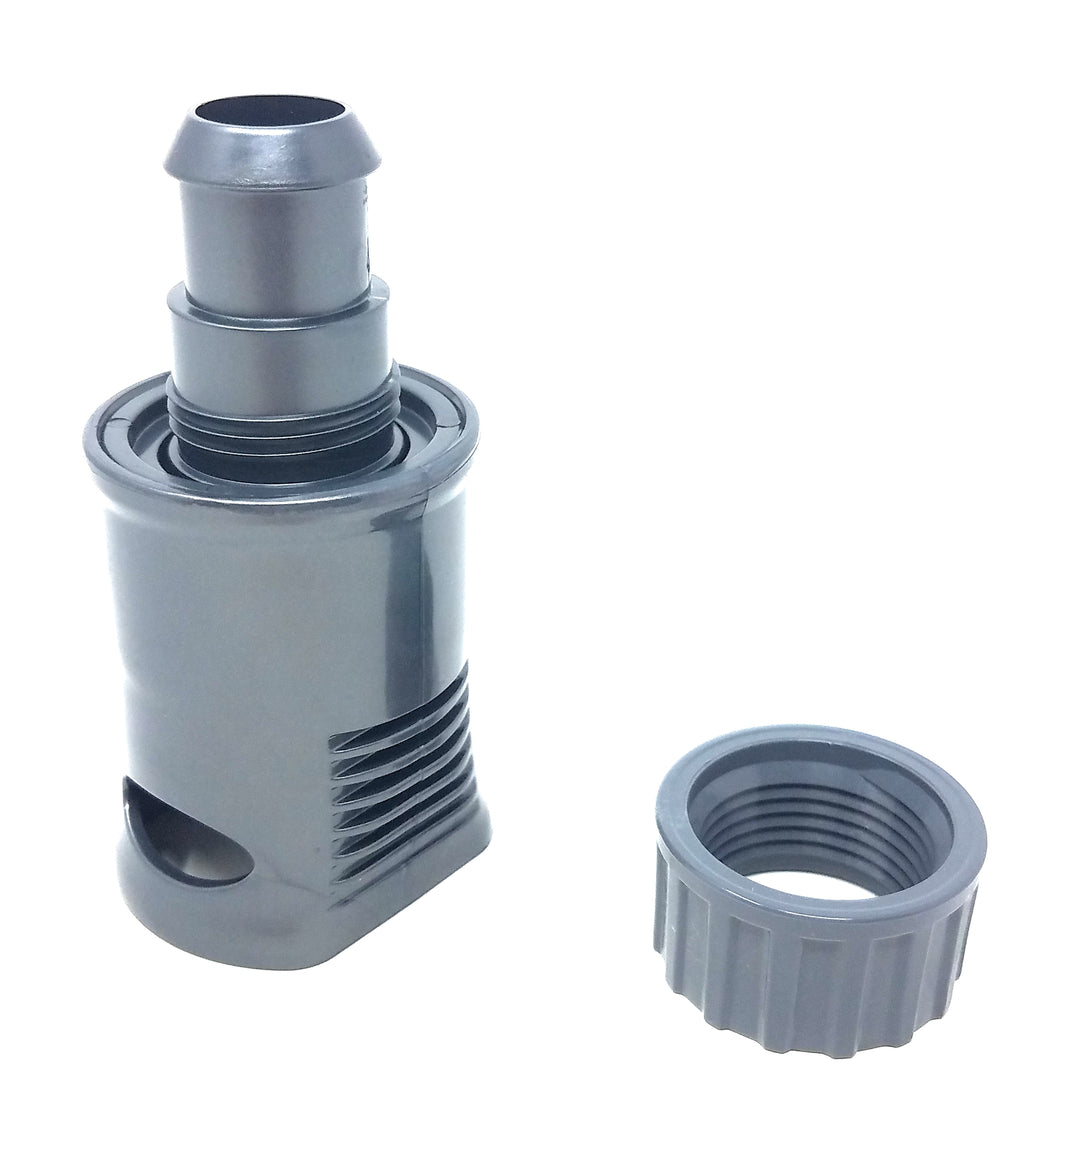 Side View of Pentair Racer / Racer LS Pressure Side Cleaner Feedline Quick Connector to cleaner Kit - ePoolSupply